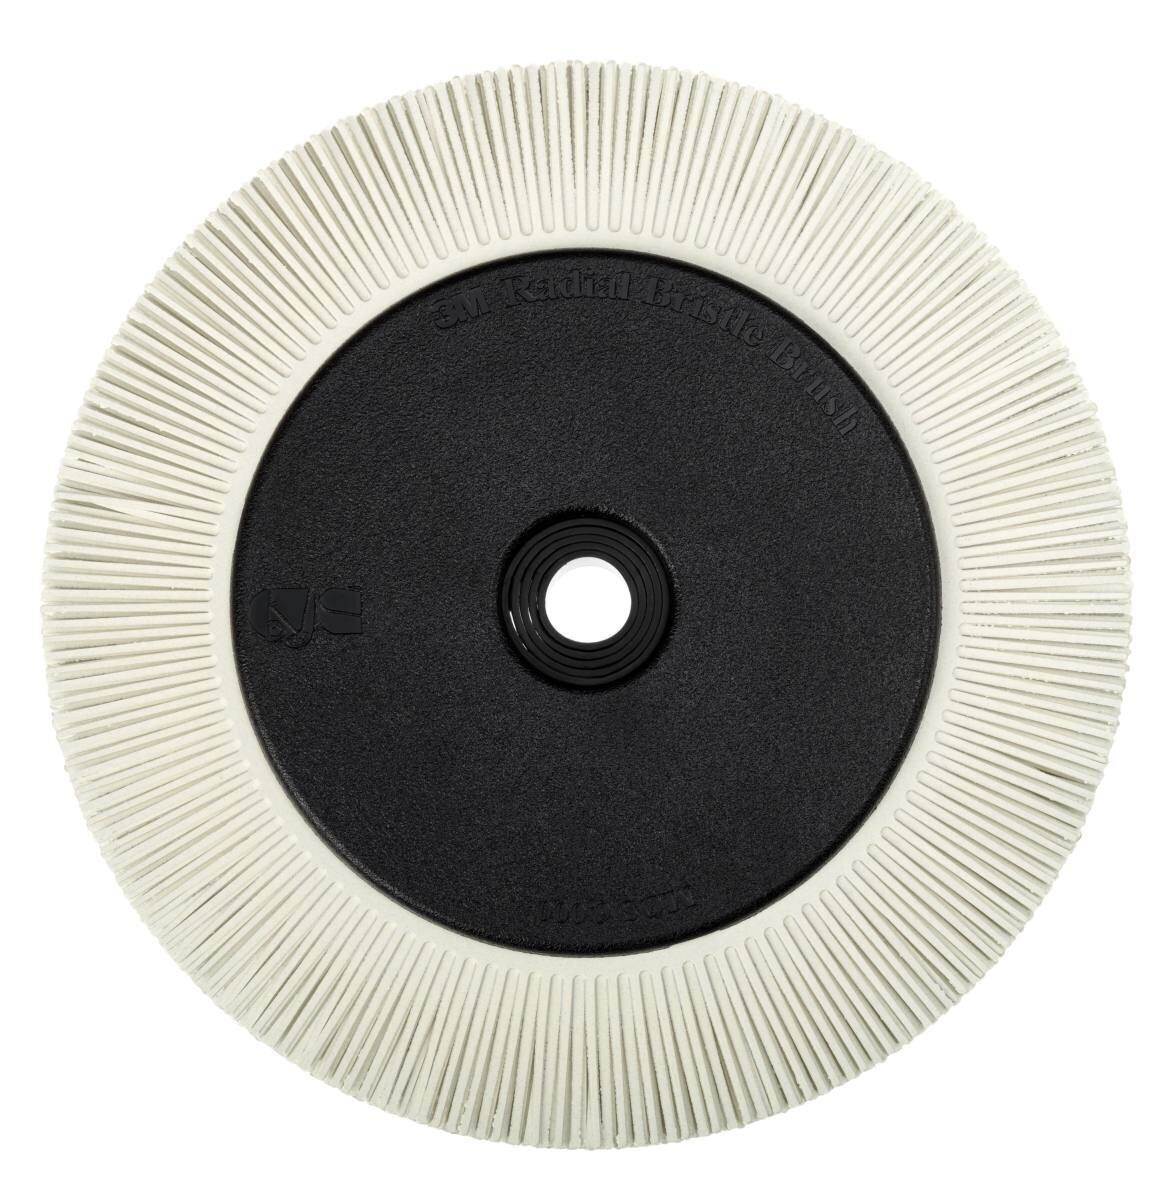 3M Scotch-Brite Radial Bristle Disc BB-ZB with flange, white, 203.2, mm P120, Type S #33083